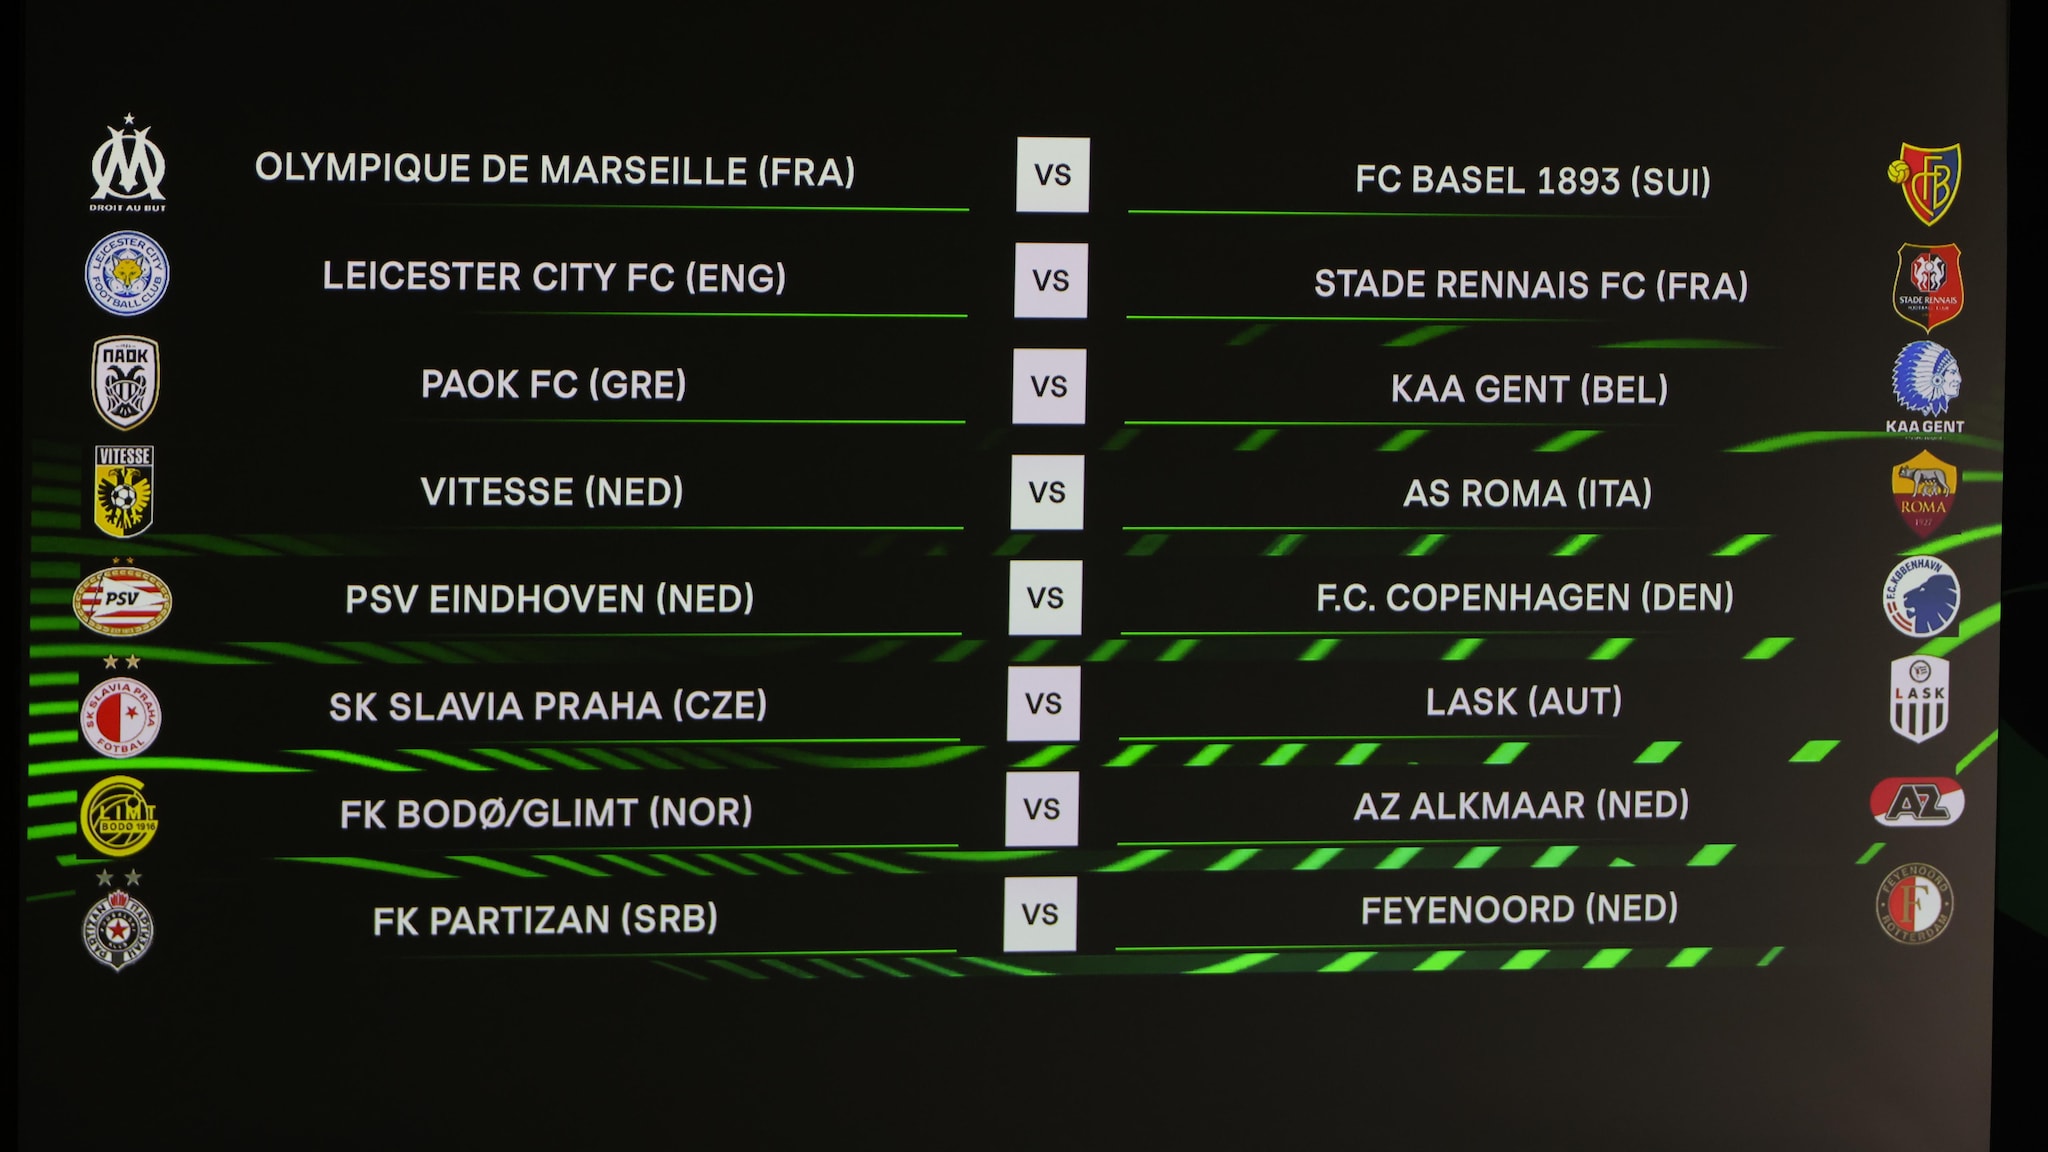 Uefa conference league results